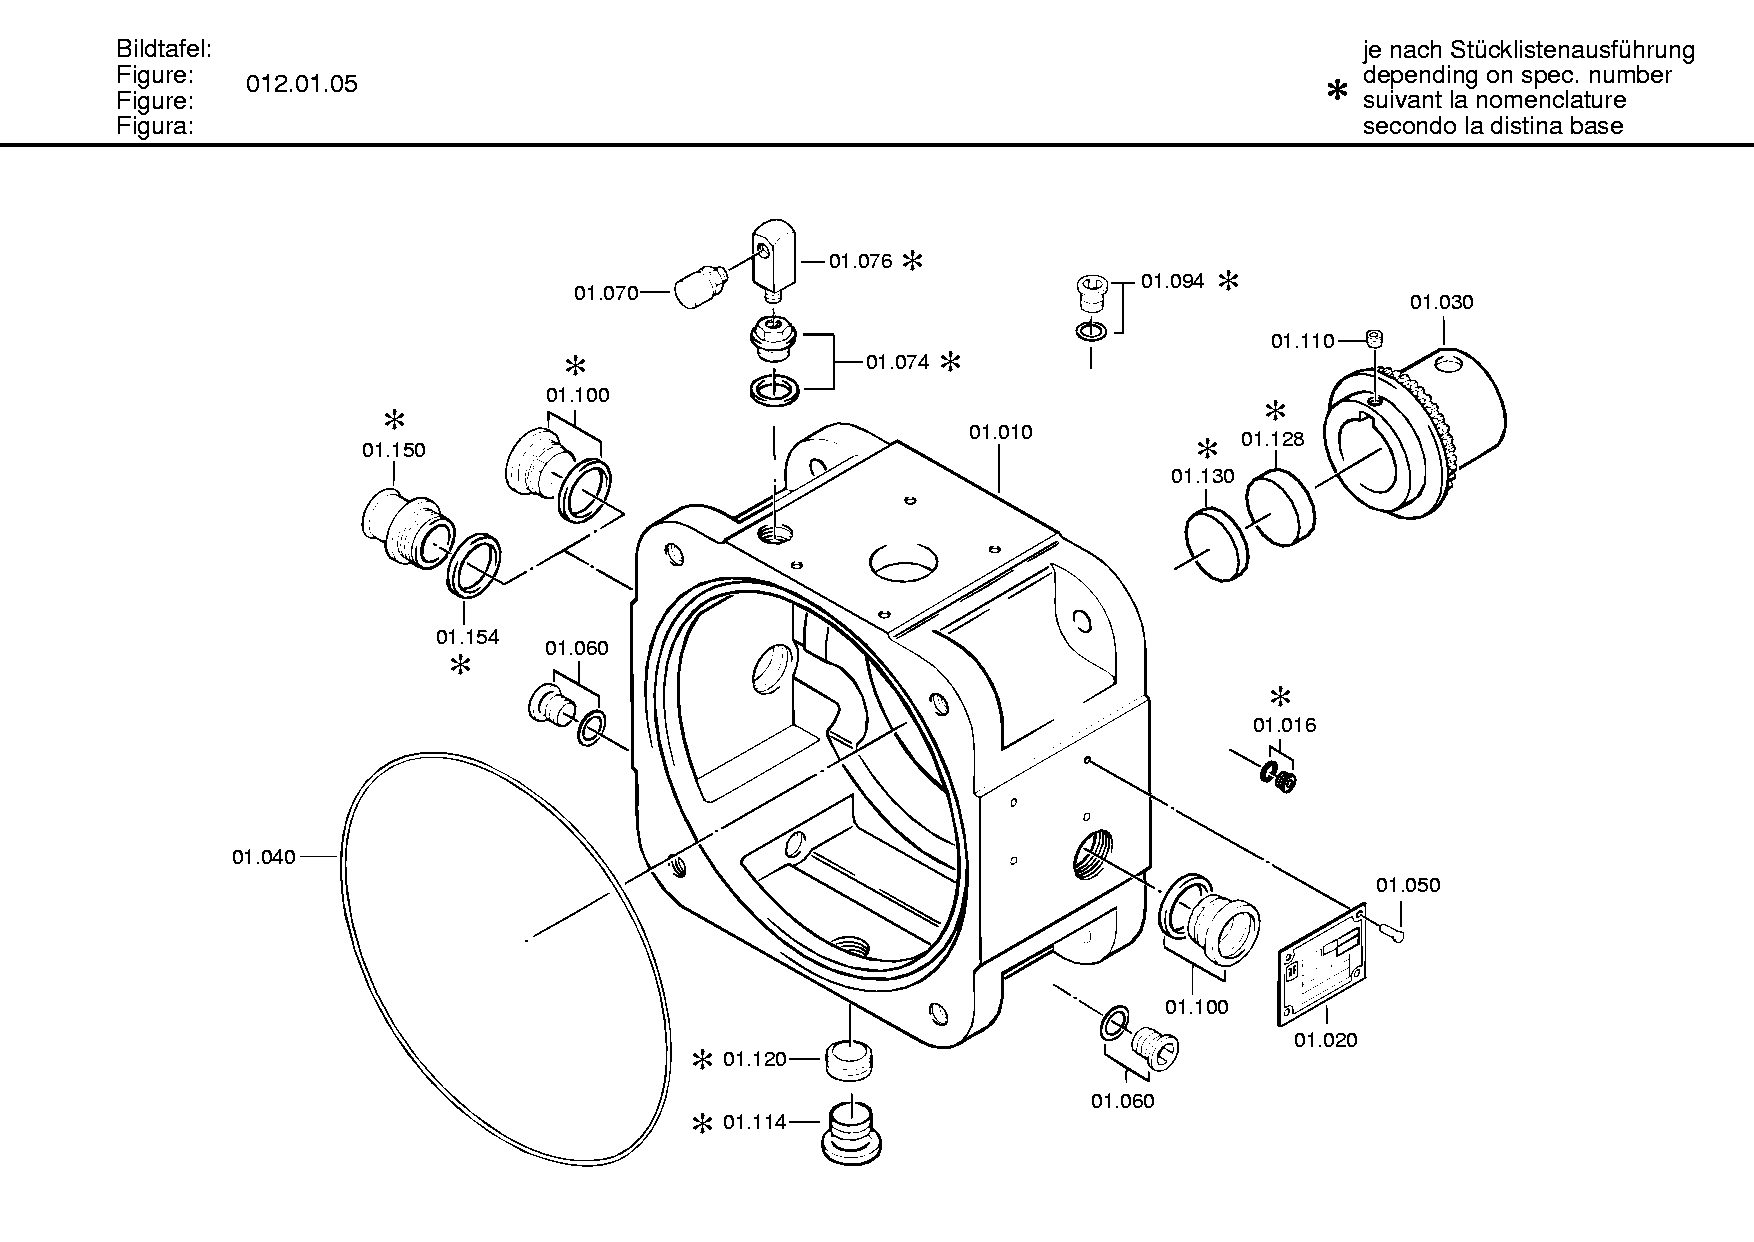 drawing for ASIA MOTORS CO. INC. 409-01-0413 - BREATHER (figure 3)